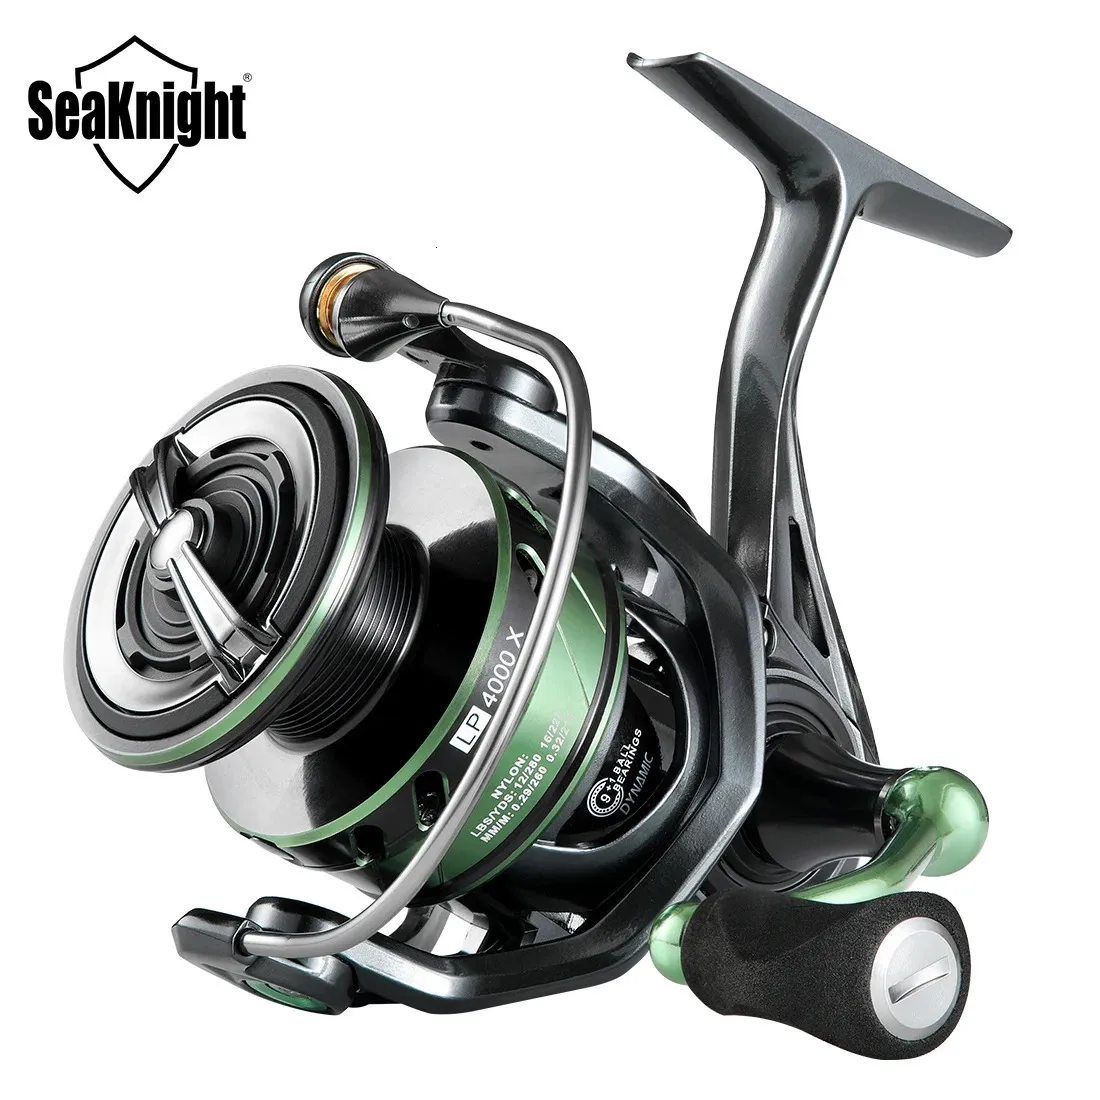 SeaKnight Brand WR III X Series Fishing Reels 52 1 Durable Gear MAX Drag 28lb Smoother Winding Spinning Reel WR3 240408